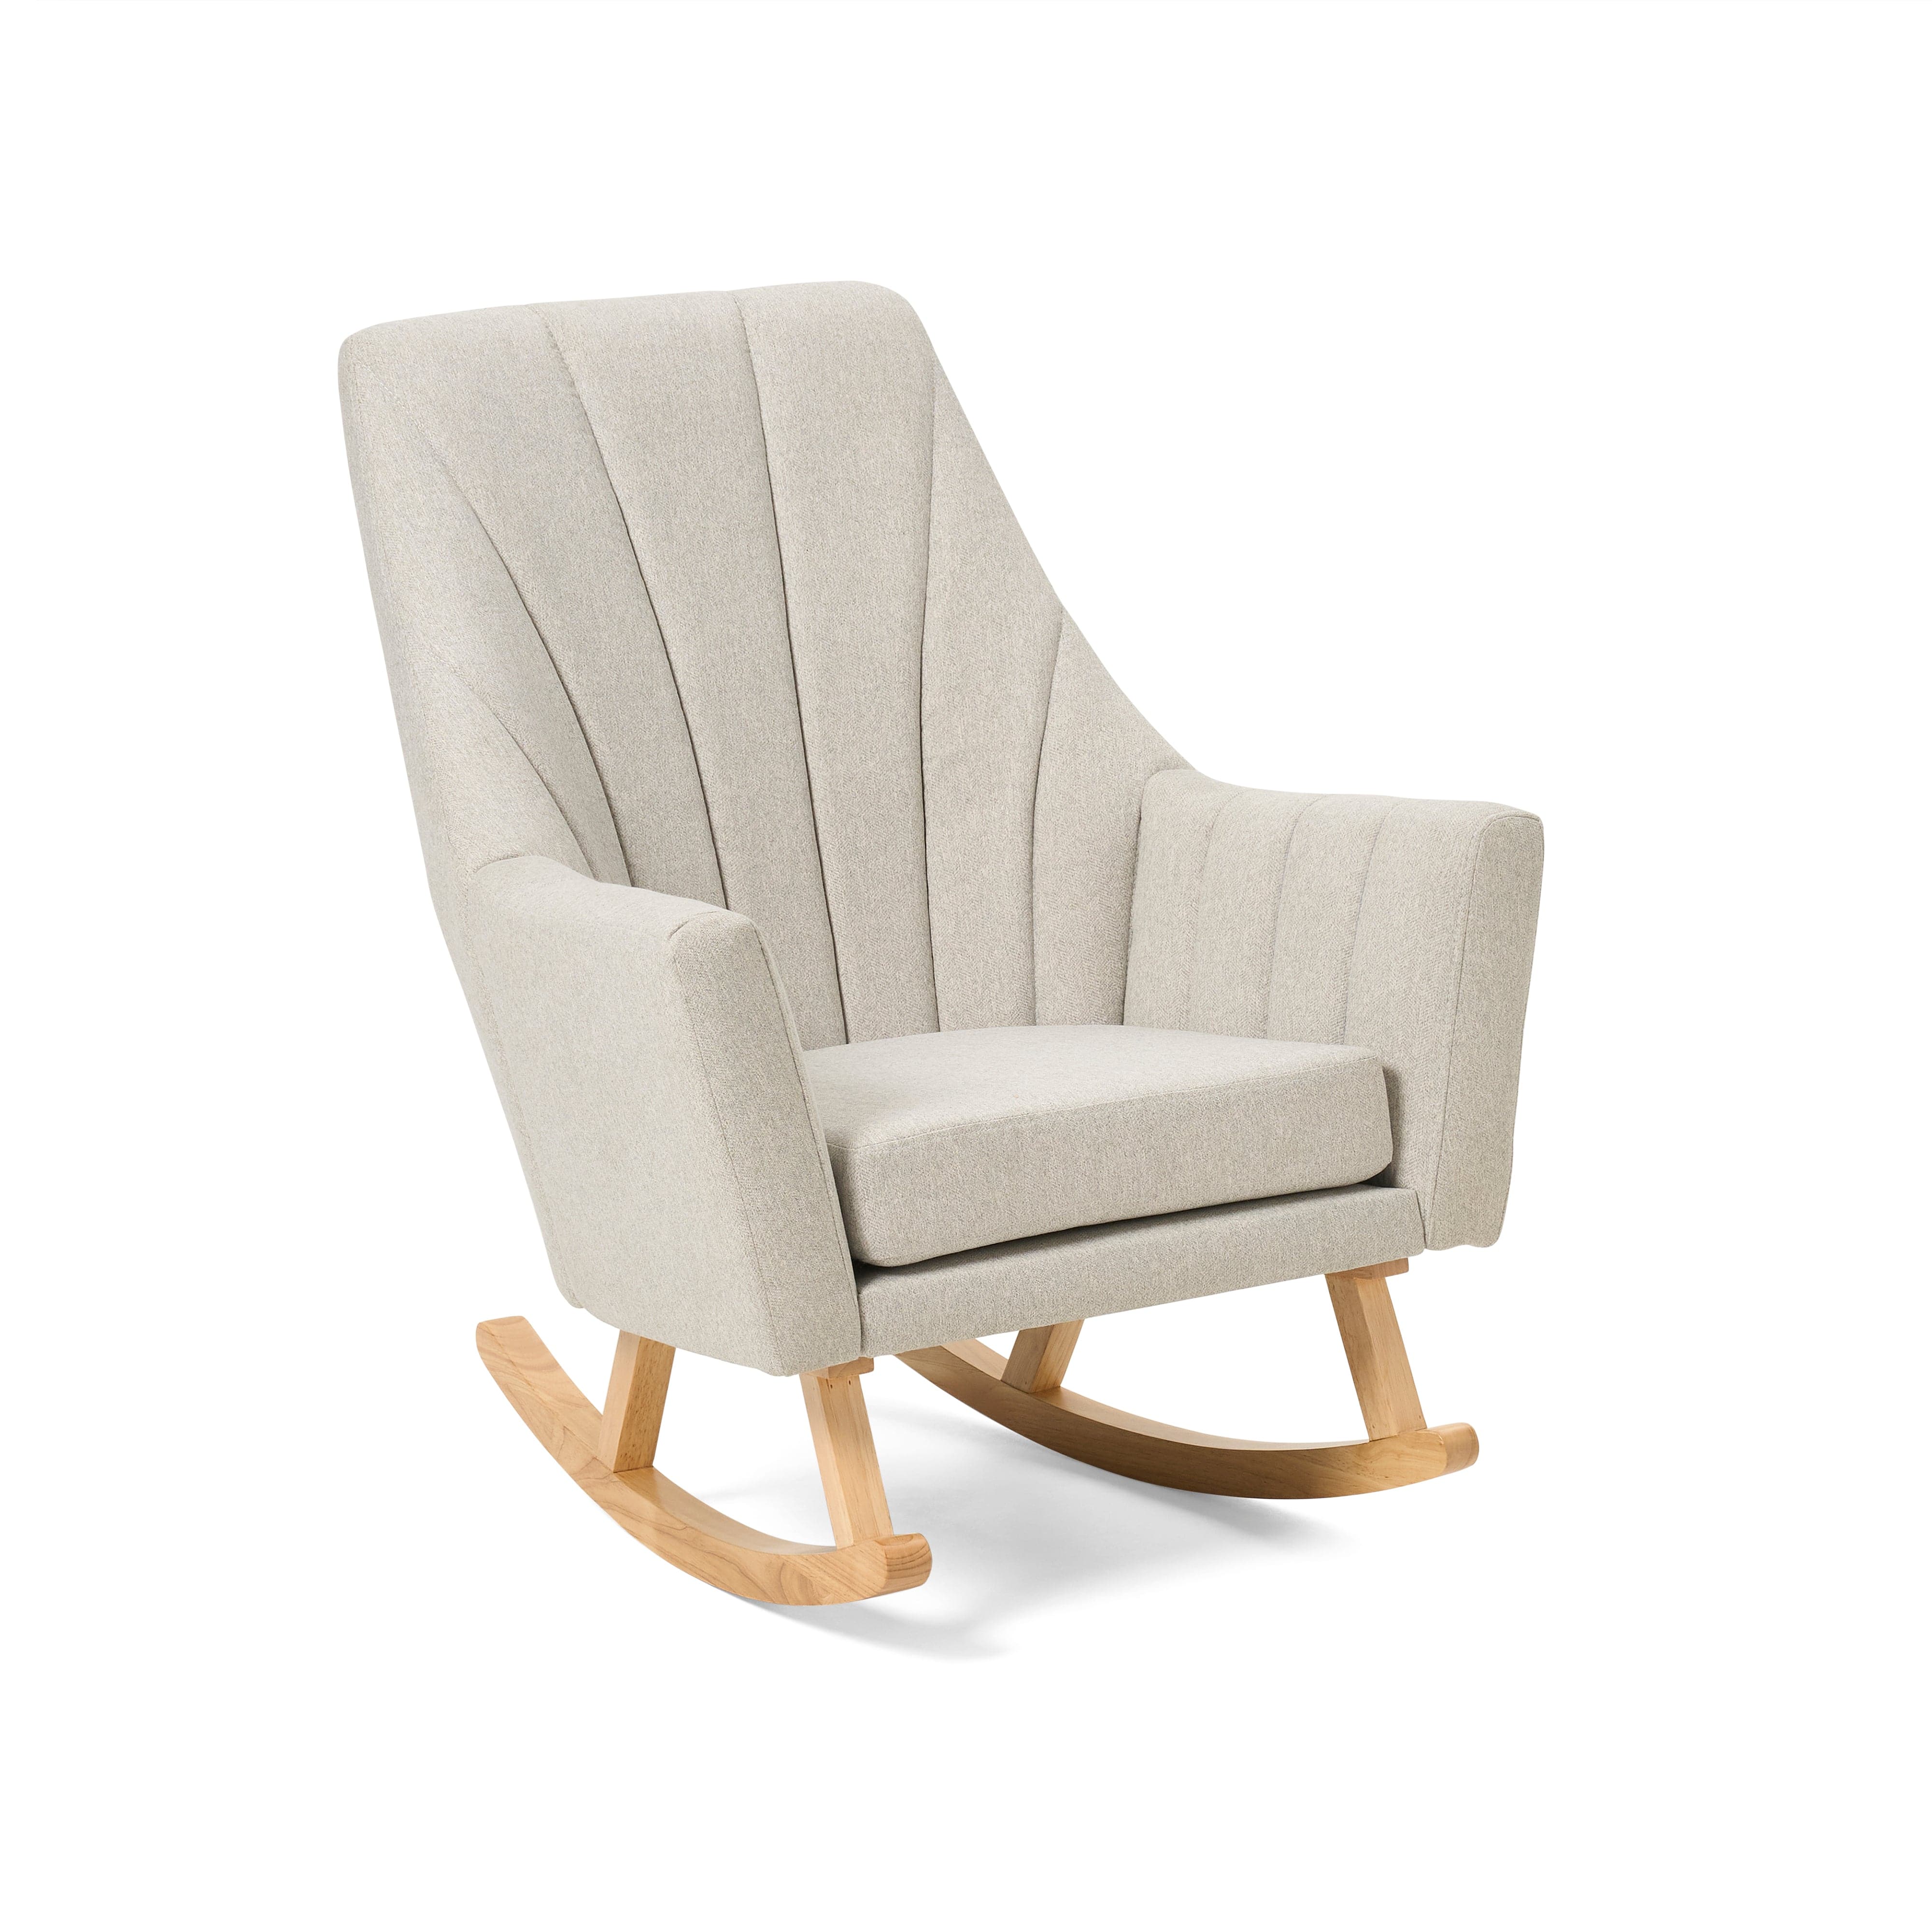 Tutti Bambini Jonah Rocking Chair & Foot Stool - Pebble -  | For Your Little One